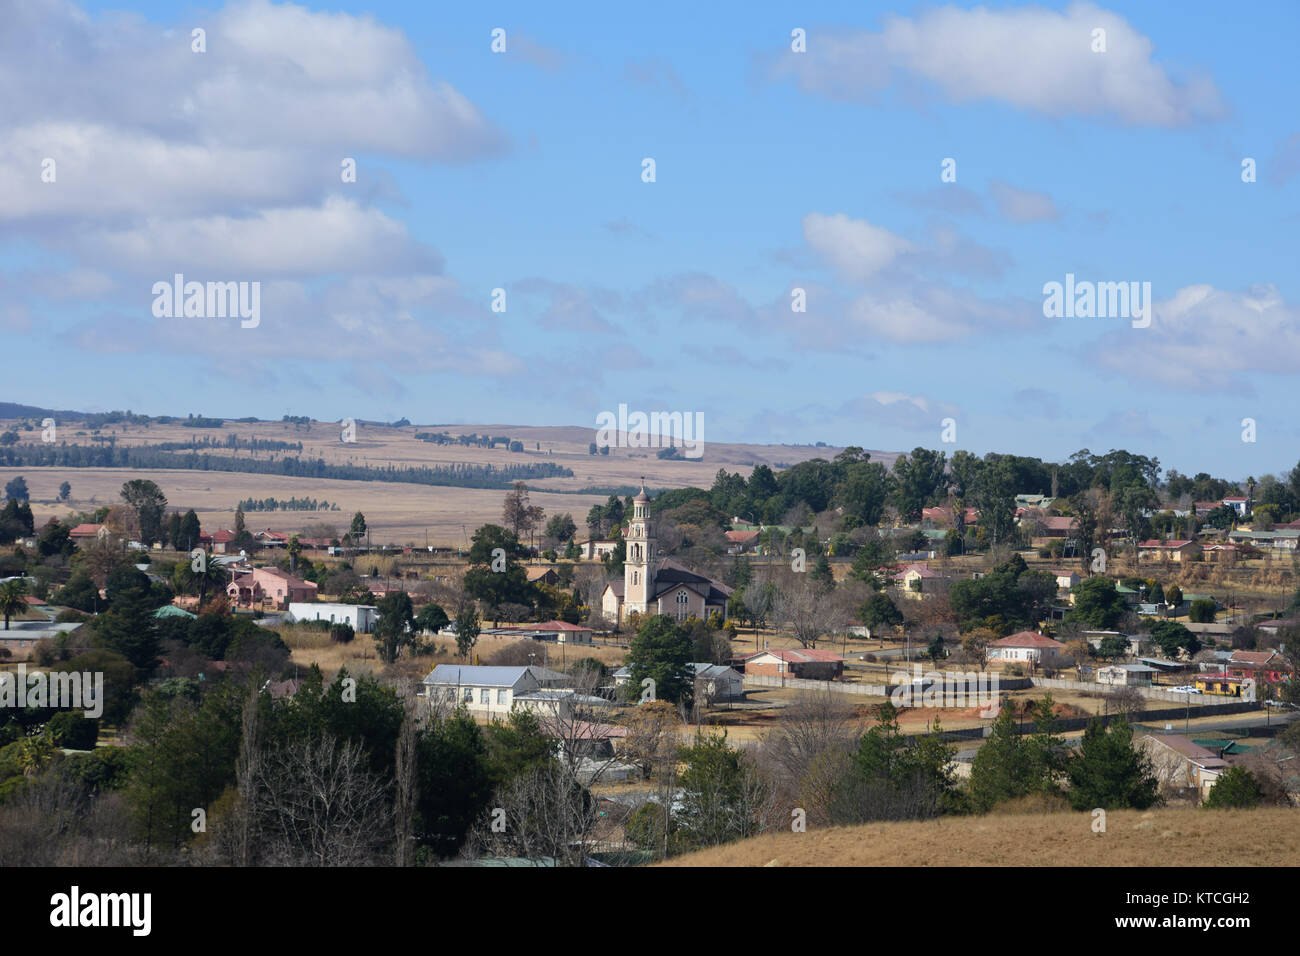 View of small town with church in the middle and farming land around the town with green trees, white cloudy and blue sky Stock Photo